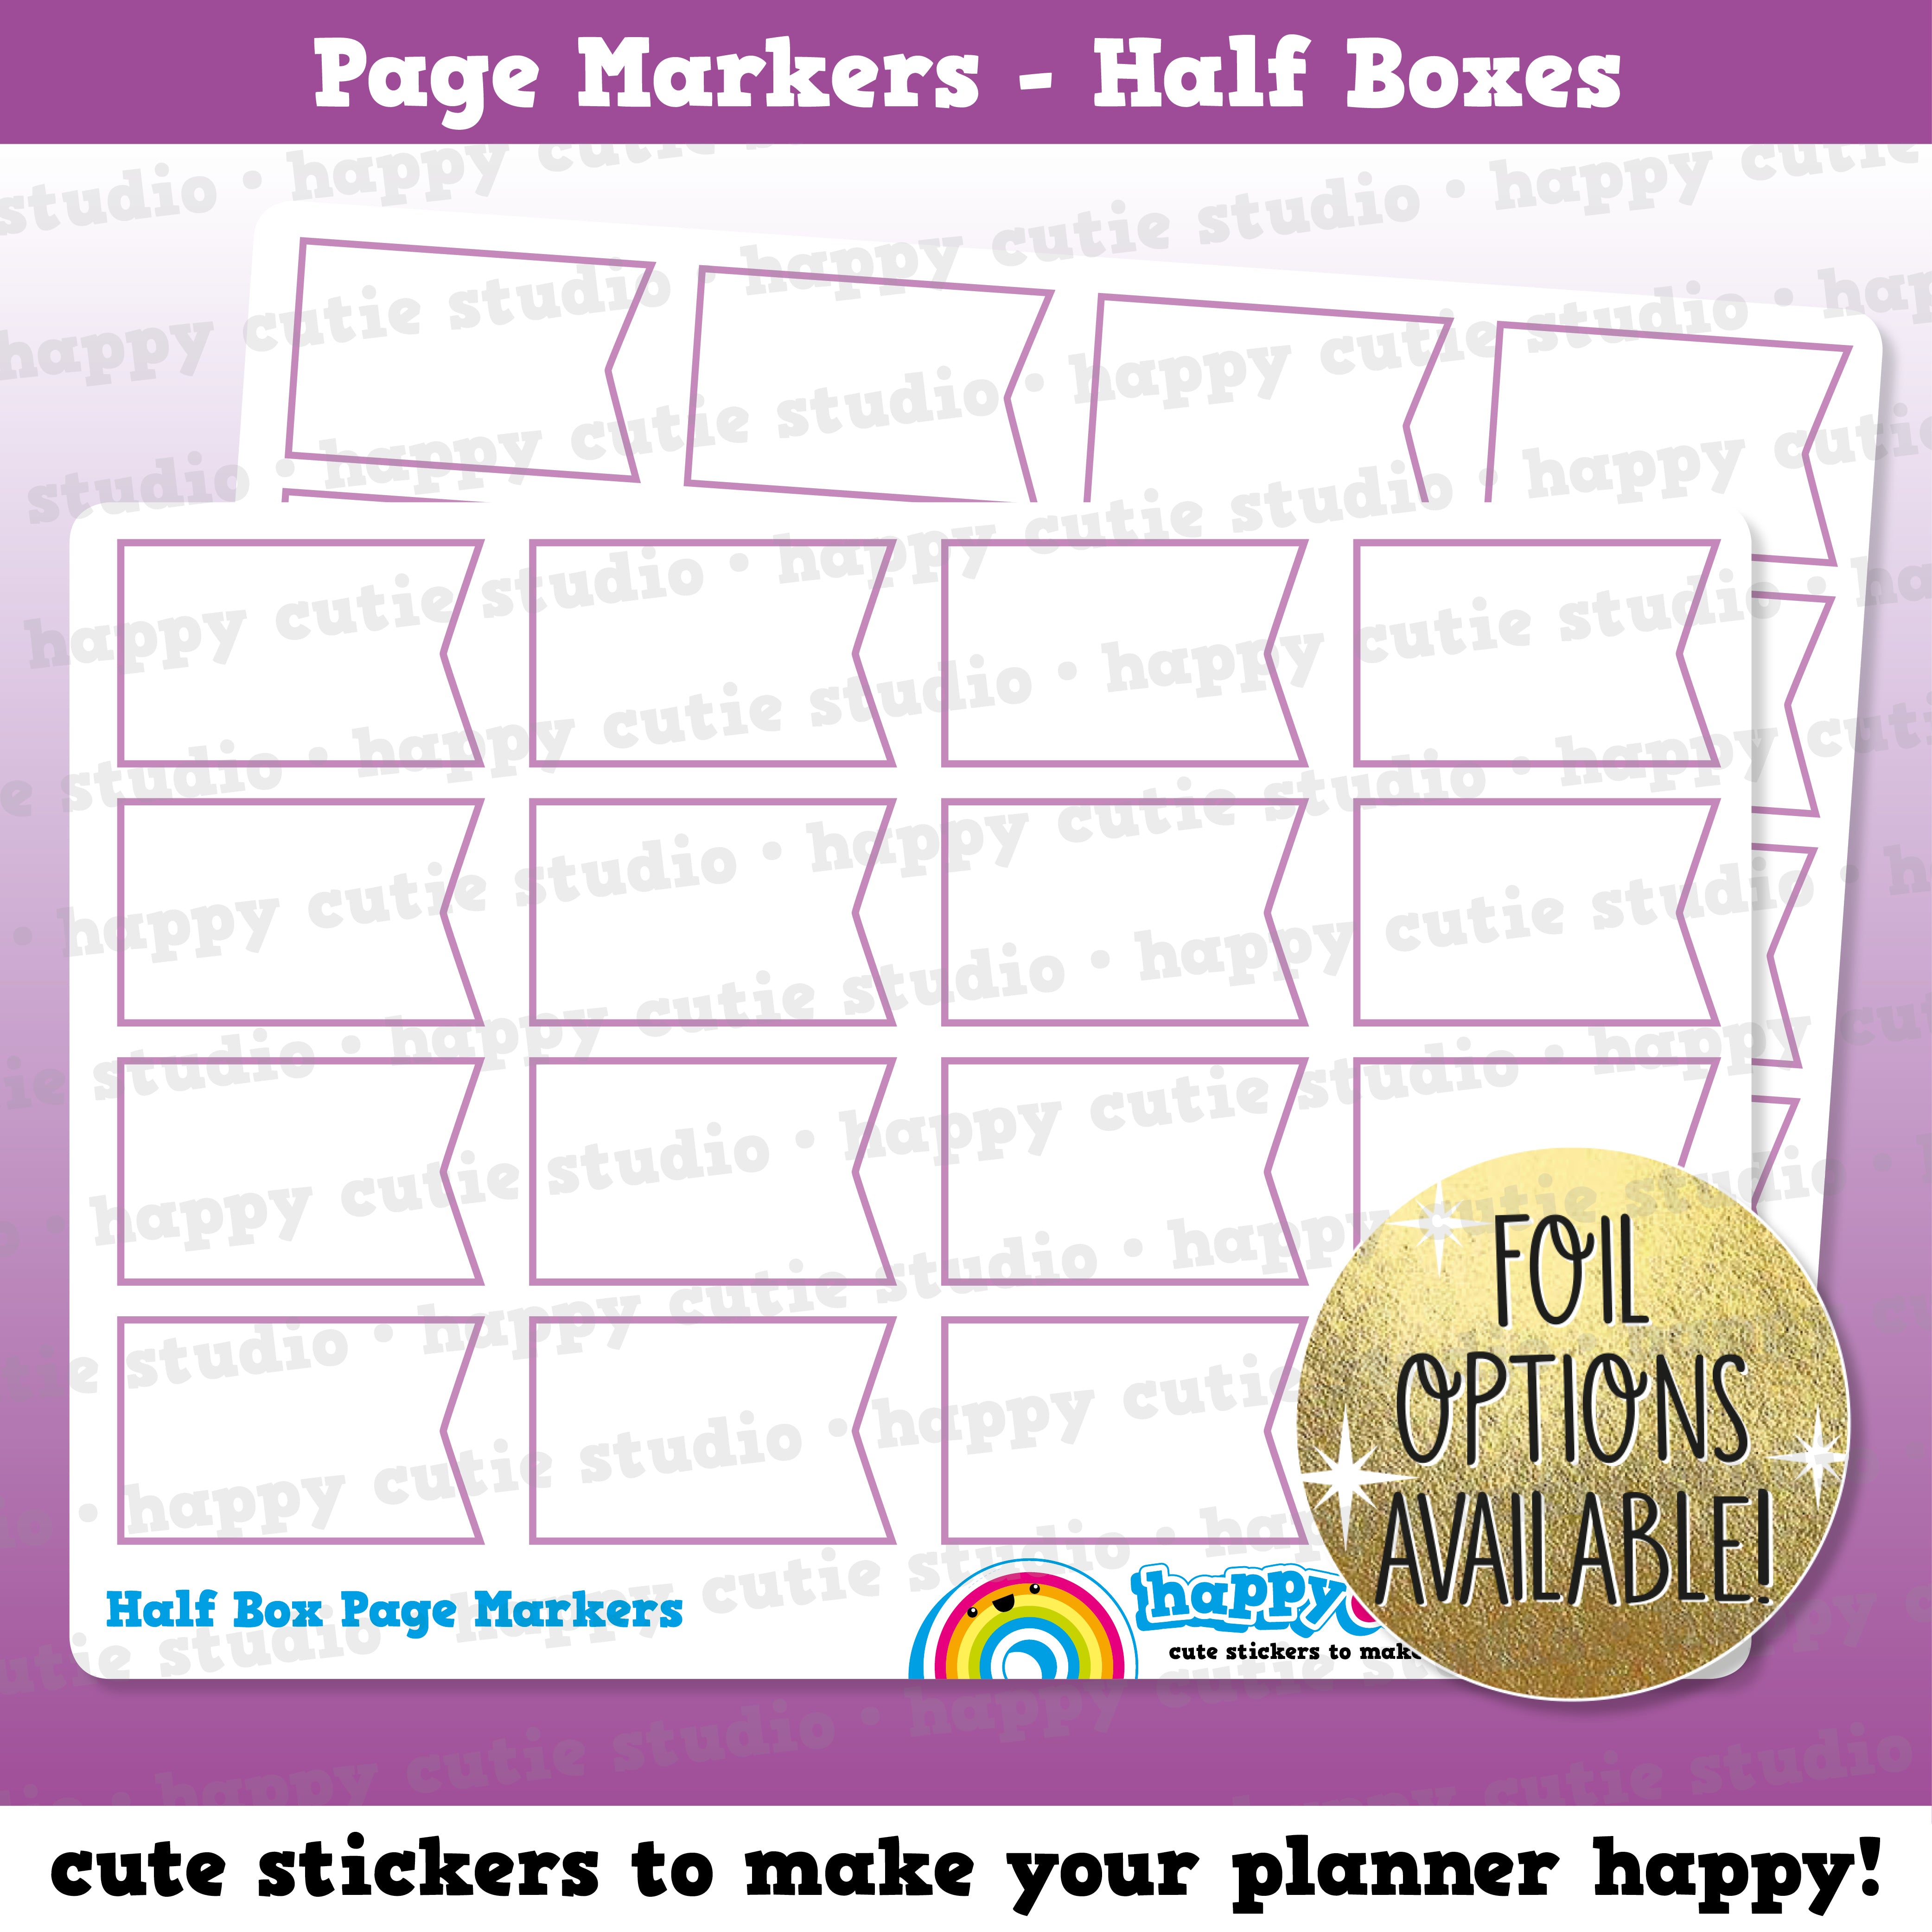 16 Cute Page Marker Half Box/Functional/Practical Planner Stickers